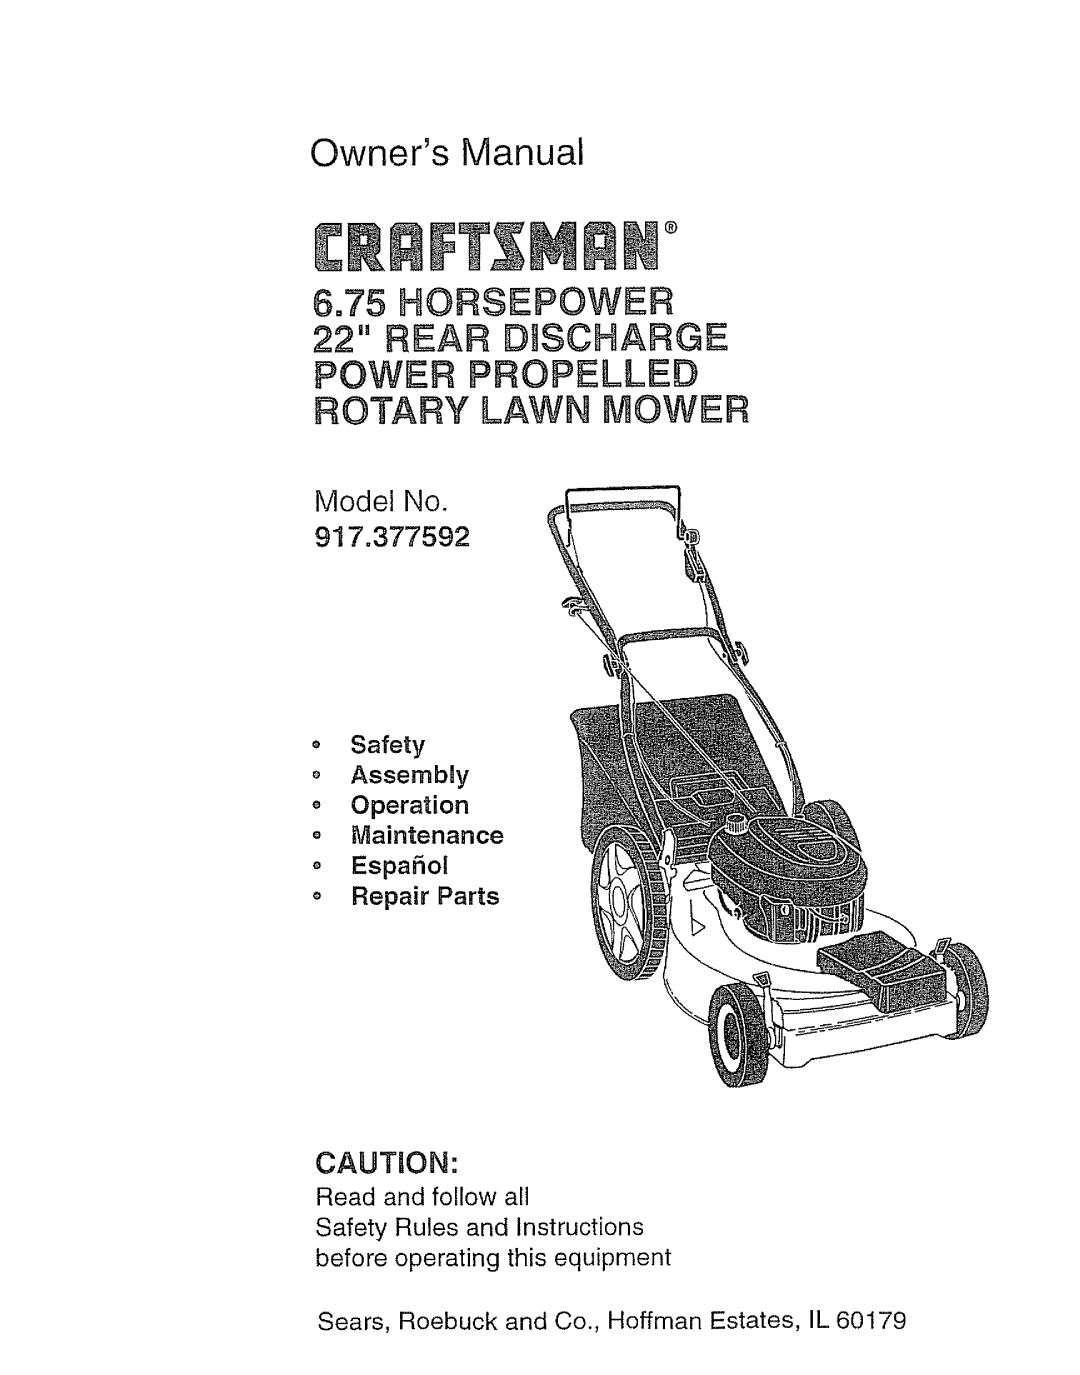 Craftsman 917.377592 manual Owners Manual, Model No. 917+377592, Cautron, Safety Assembly o Operation o Maintenance 